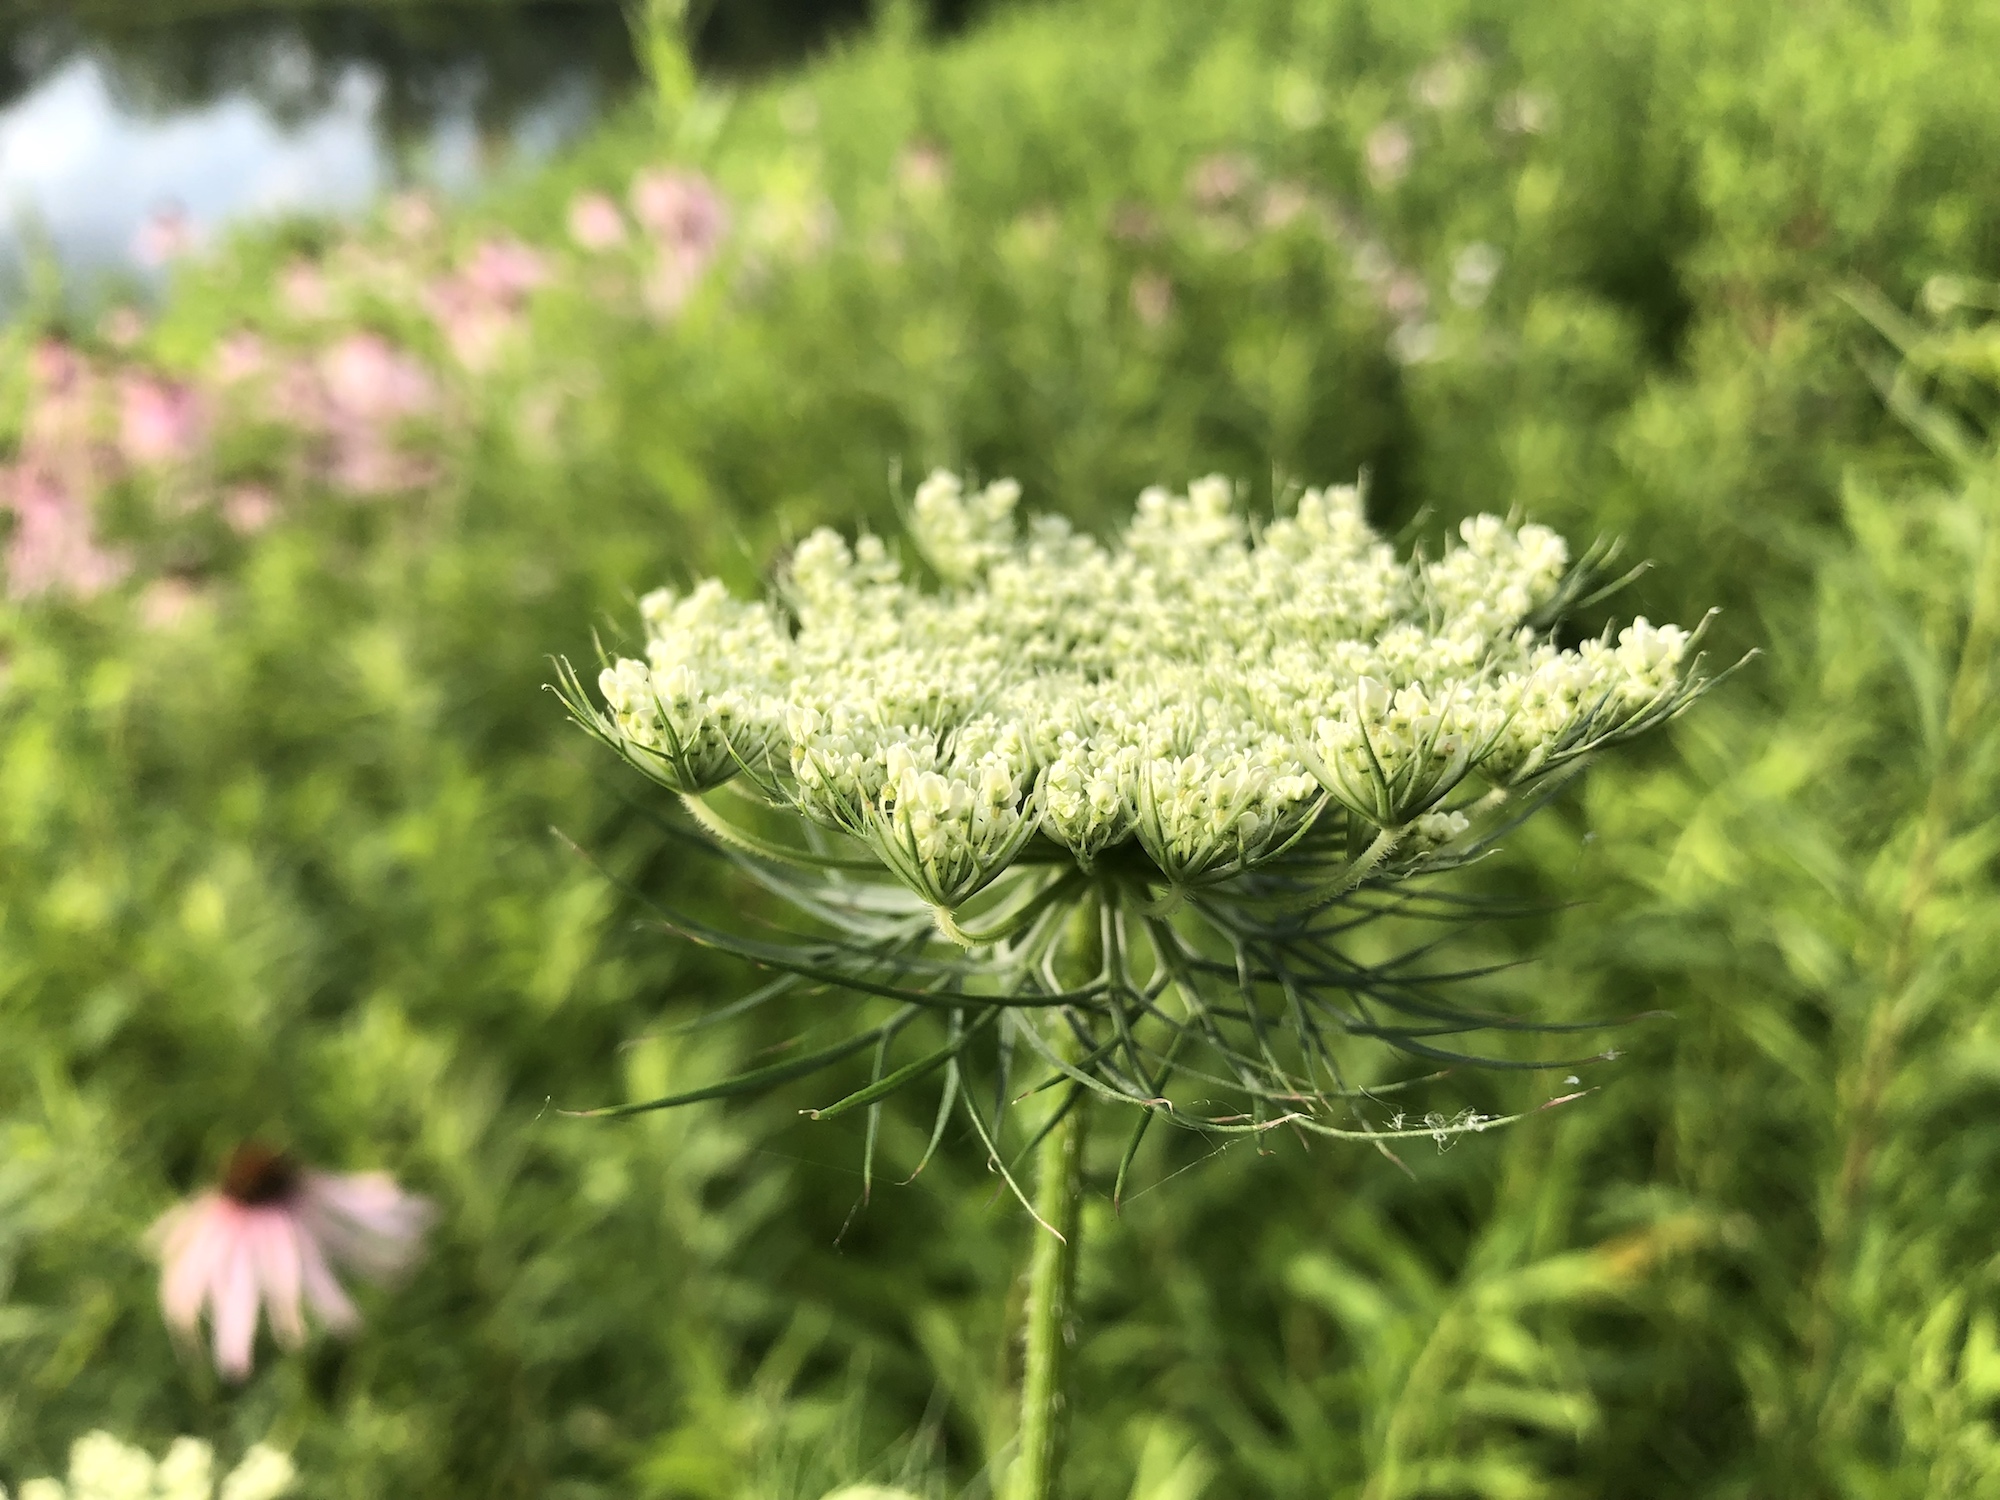 Queen Anne's Lace on bank of retaining pond on the corner of Nakoma Road and Manitou Way in Madison, WI on July 3, 2019.